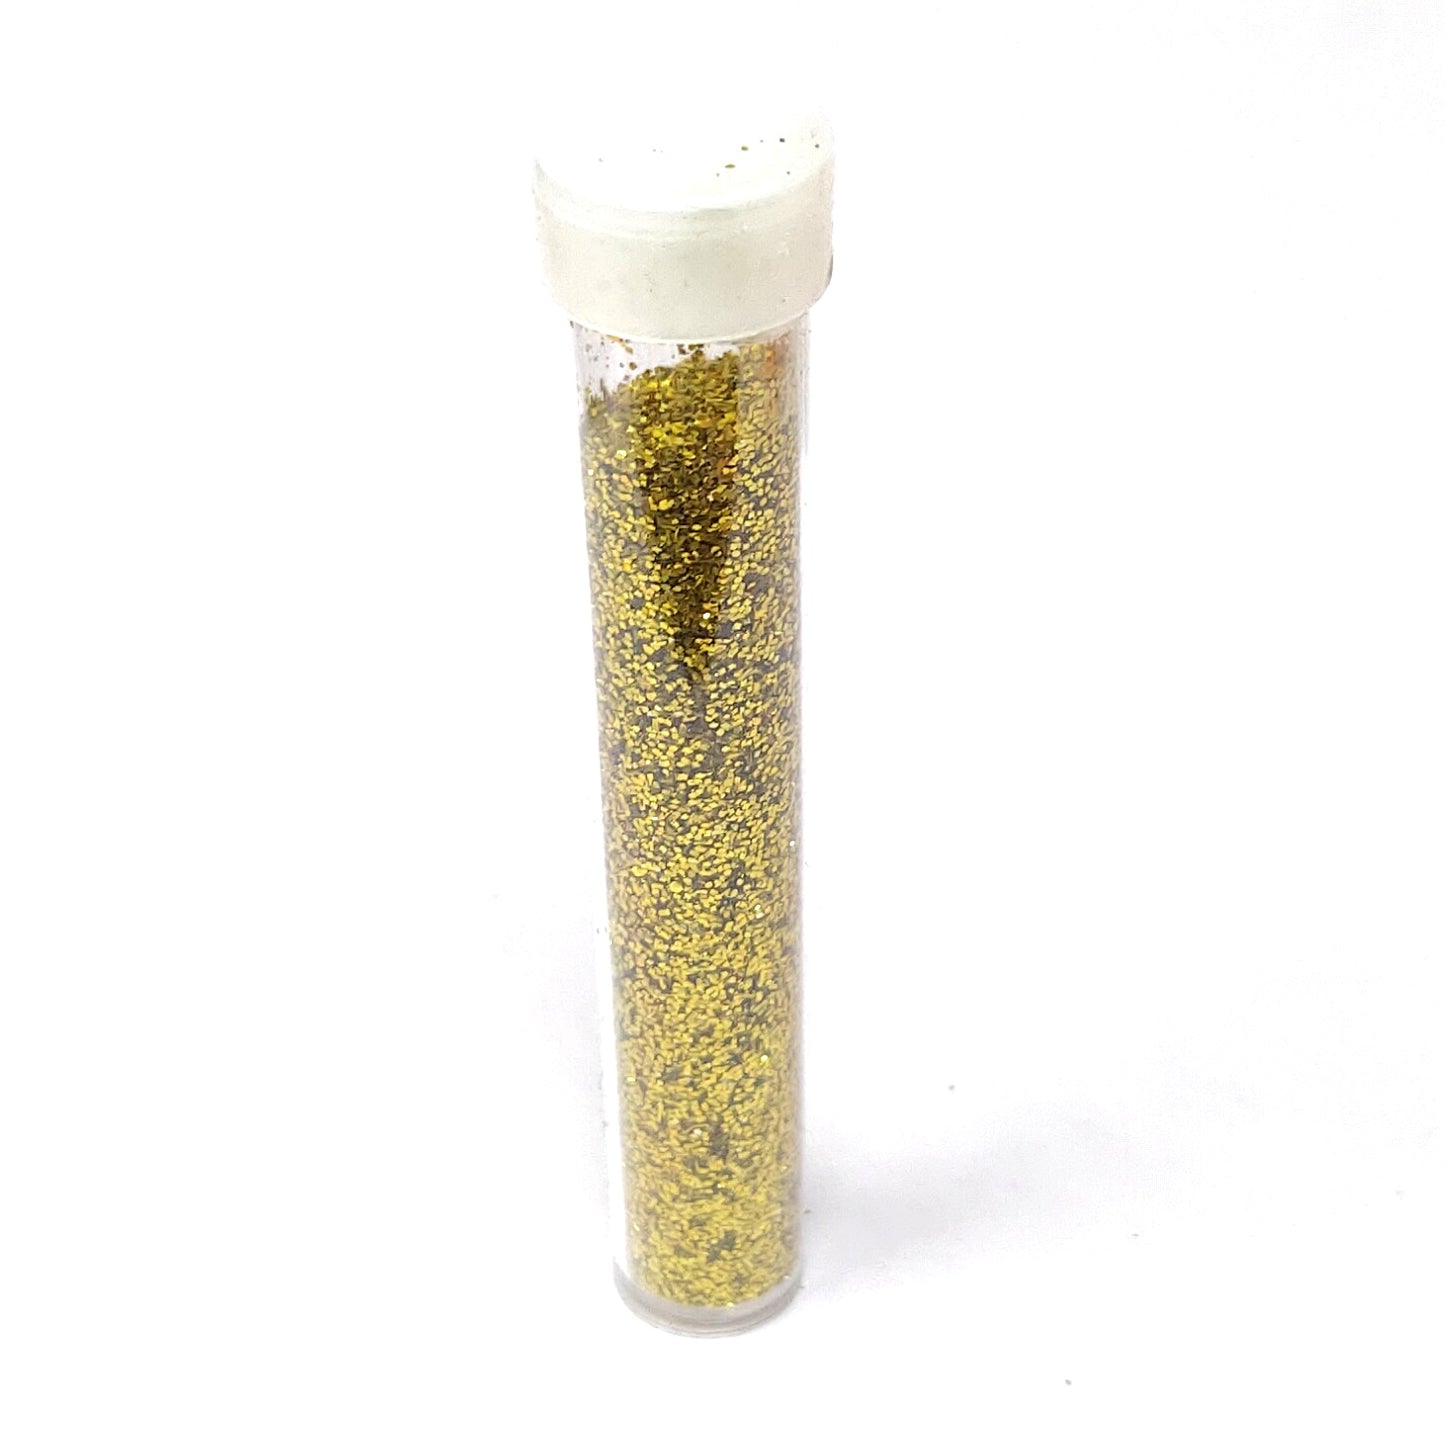 5 gram Golden Glitter for Arts and Crafts, Scrapbooking, Paper Decorations and Other Activities (002)